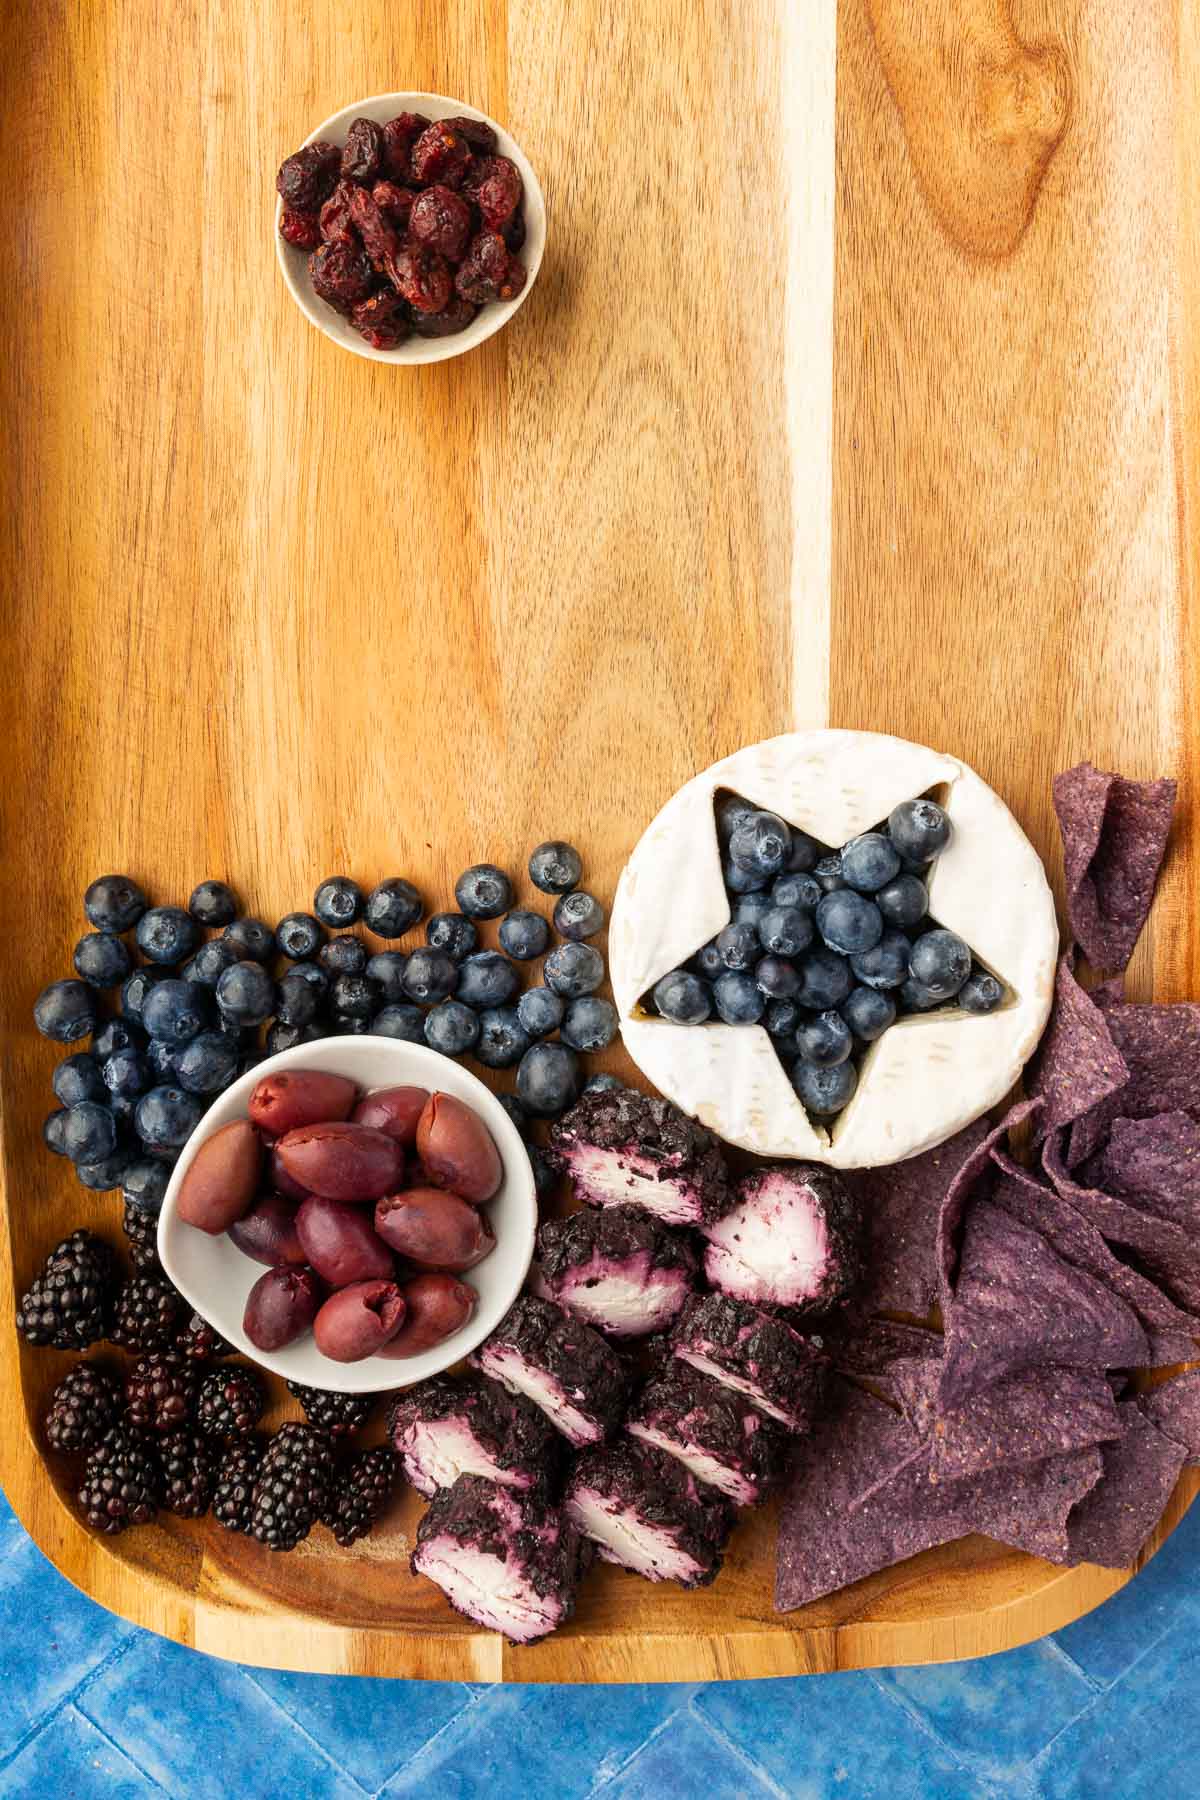 A wood charcuterie board with a round brie with a star cut out of it and filled with blueberries, a blueberry goat cheese log, blue corn tortilla chips, blackberries, a bowl of kalamata olives, and a bowl of dried cranberries.